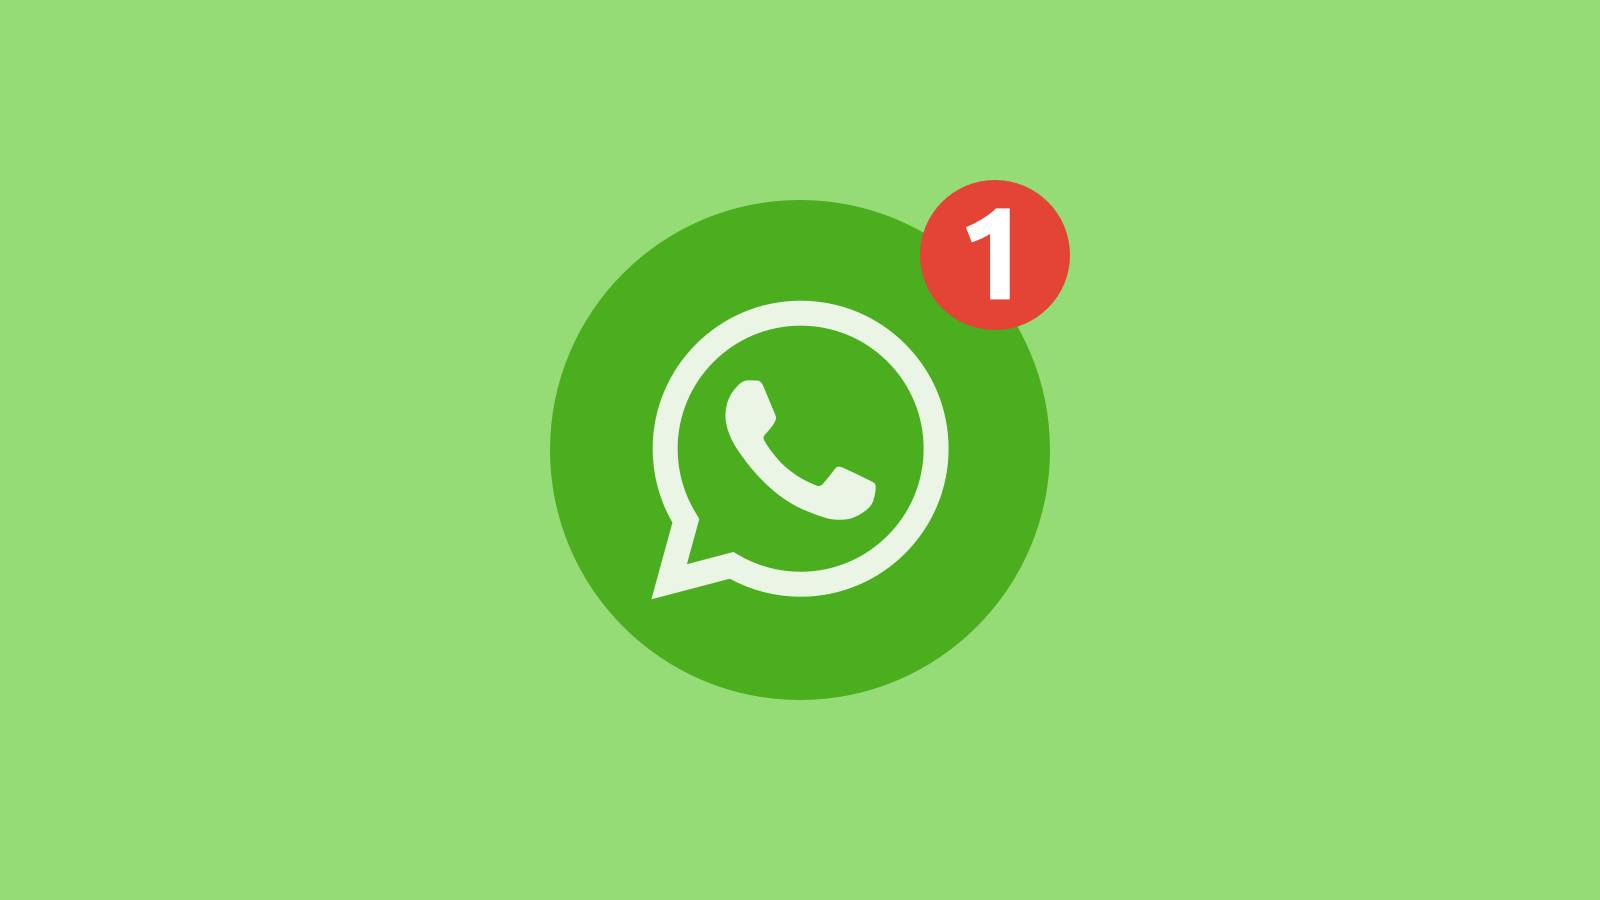 WhatsApp Redesignet iPhone Android modifikation gør hemmelig